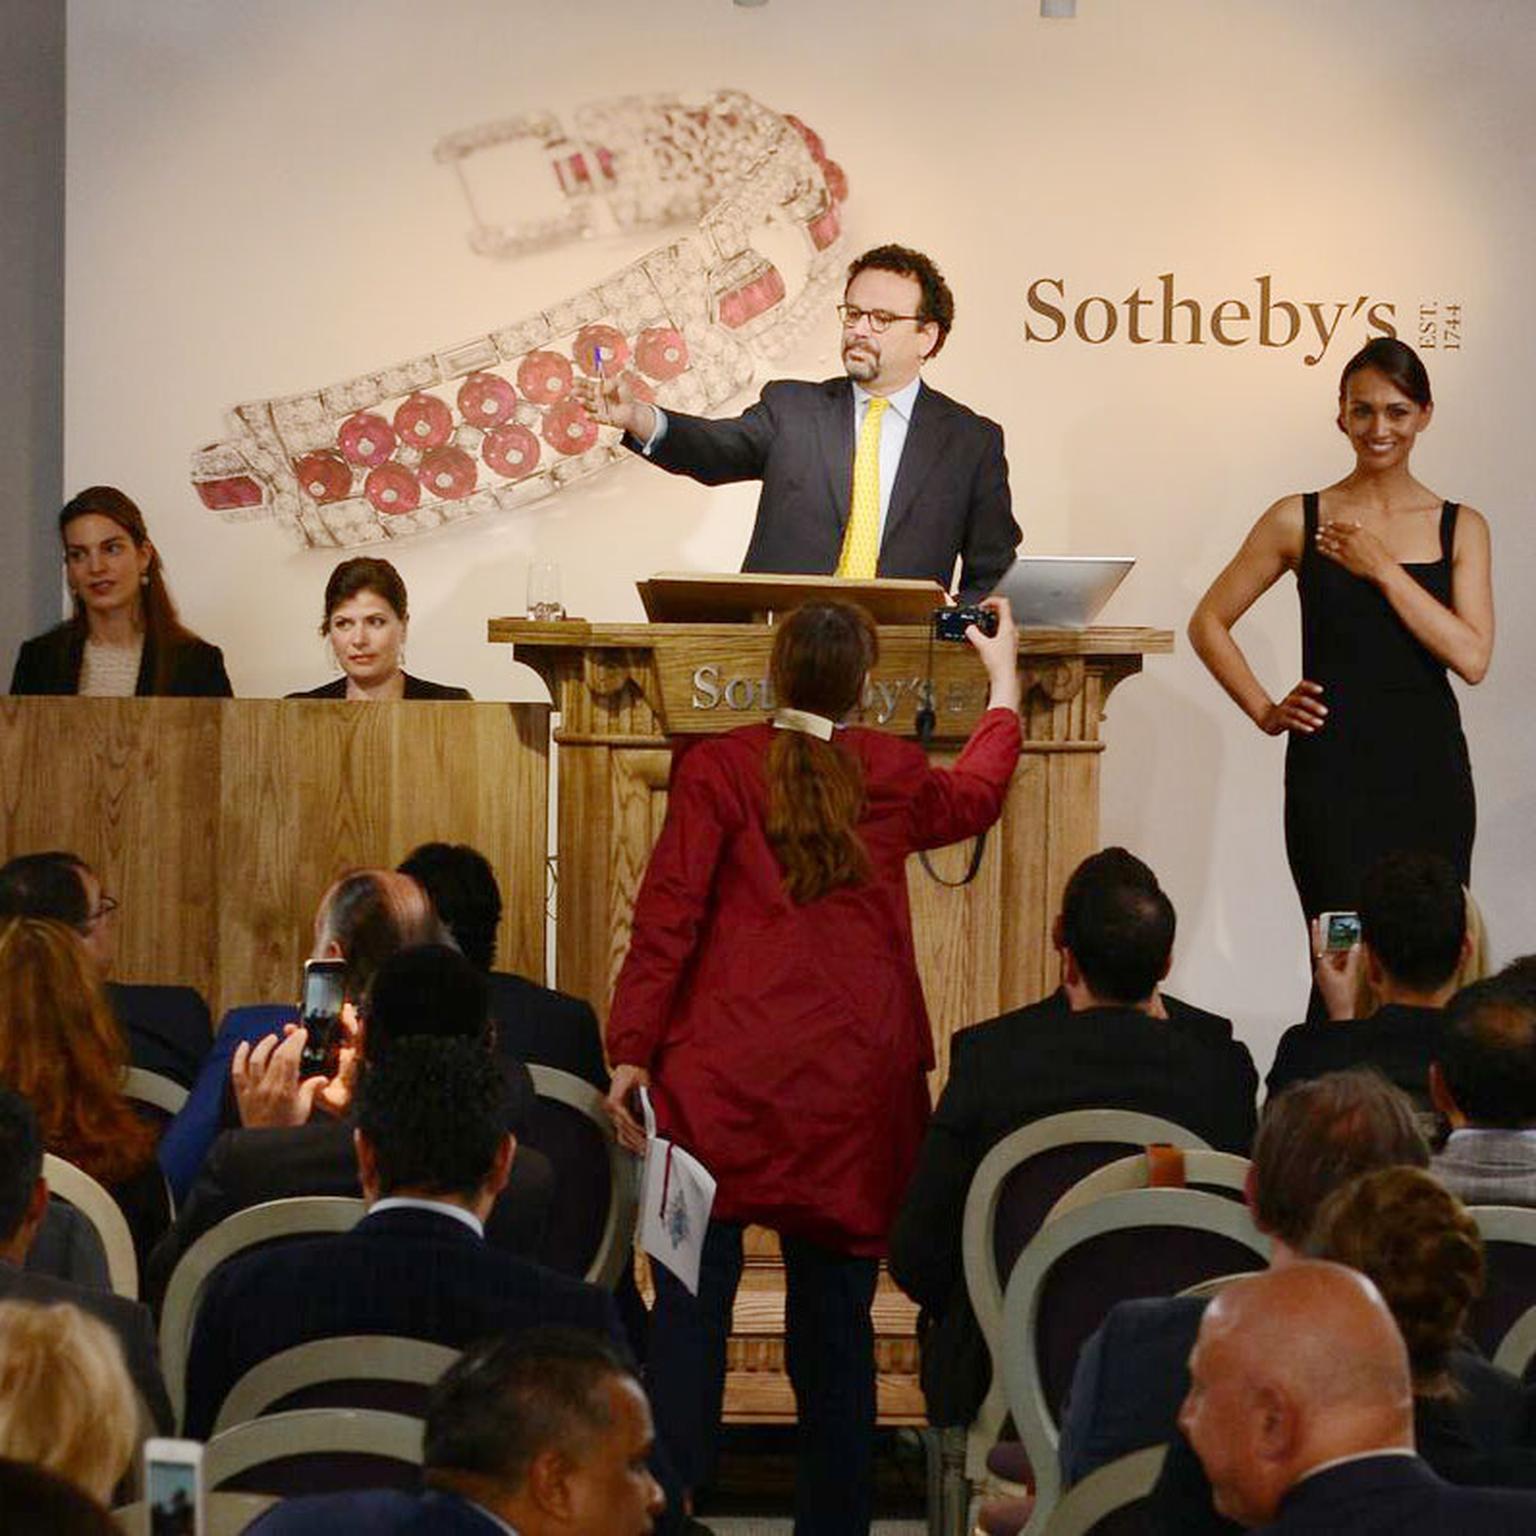 Sotheby's auction house